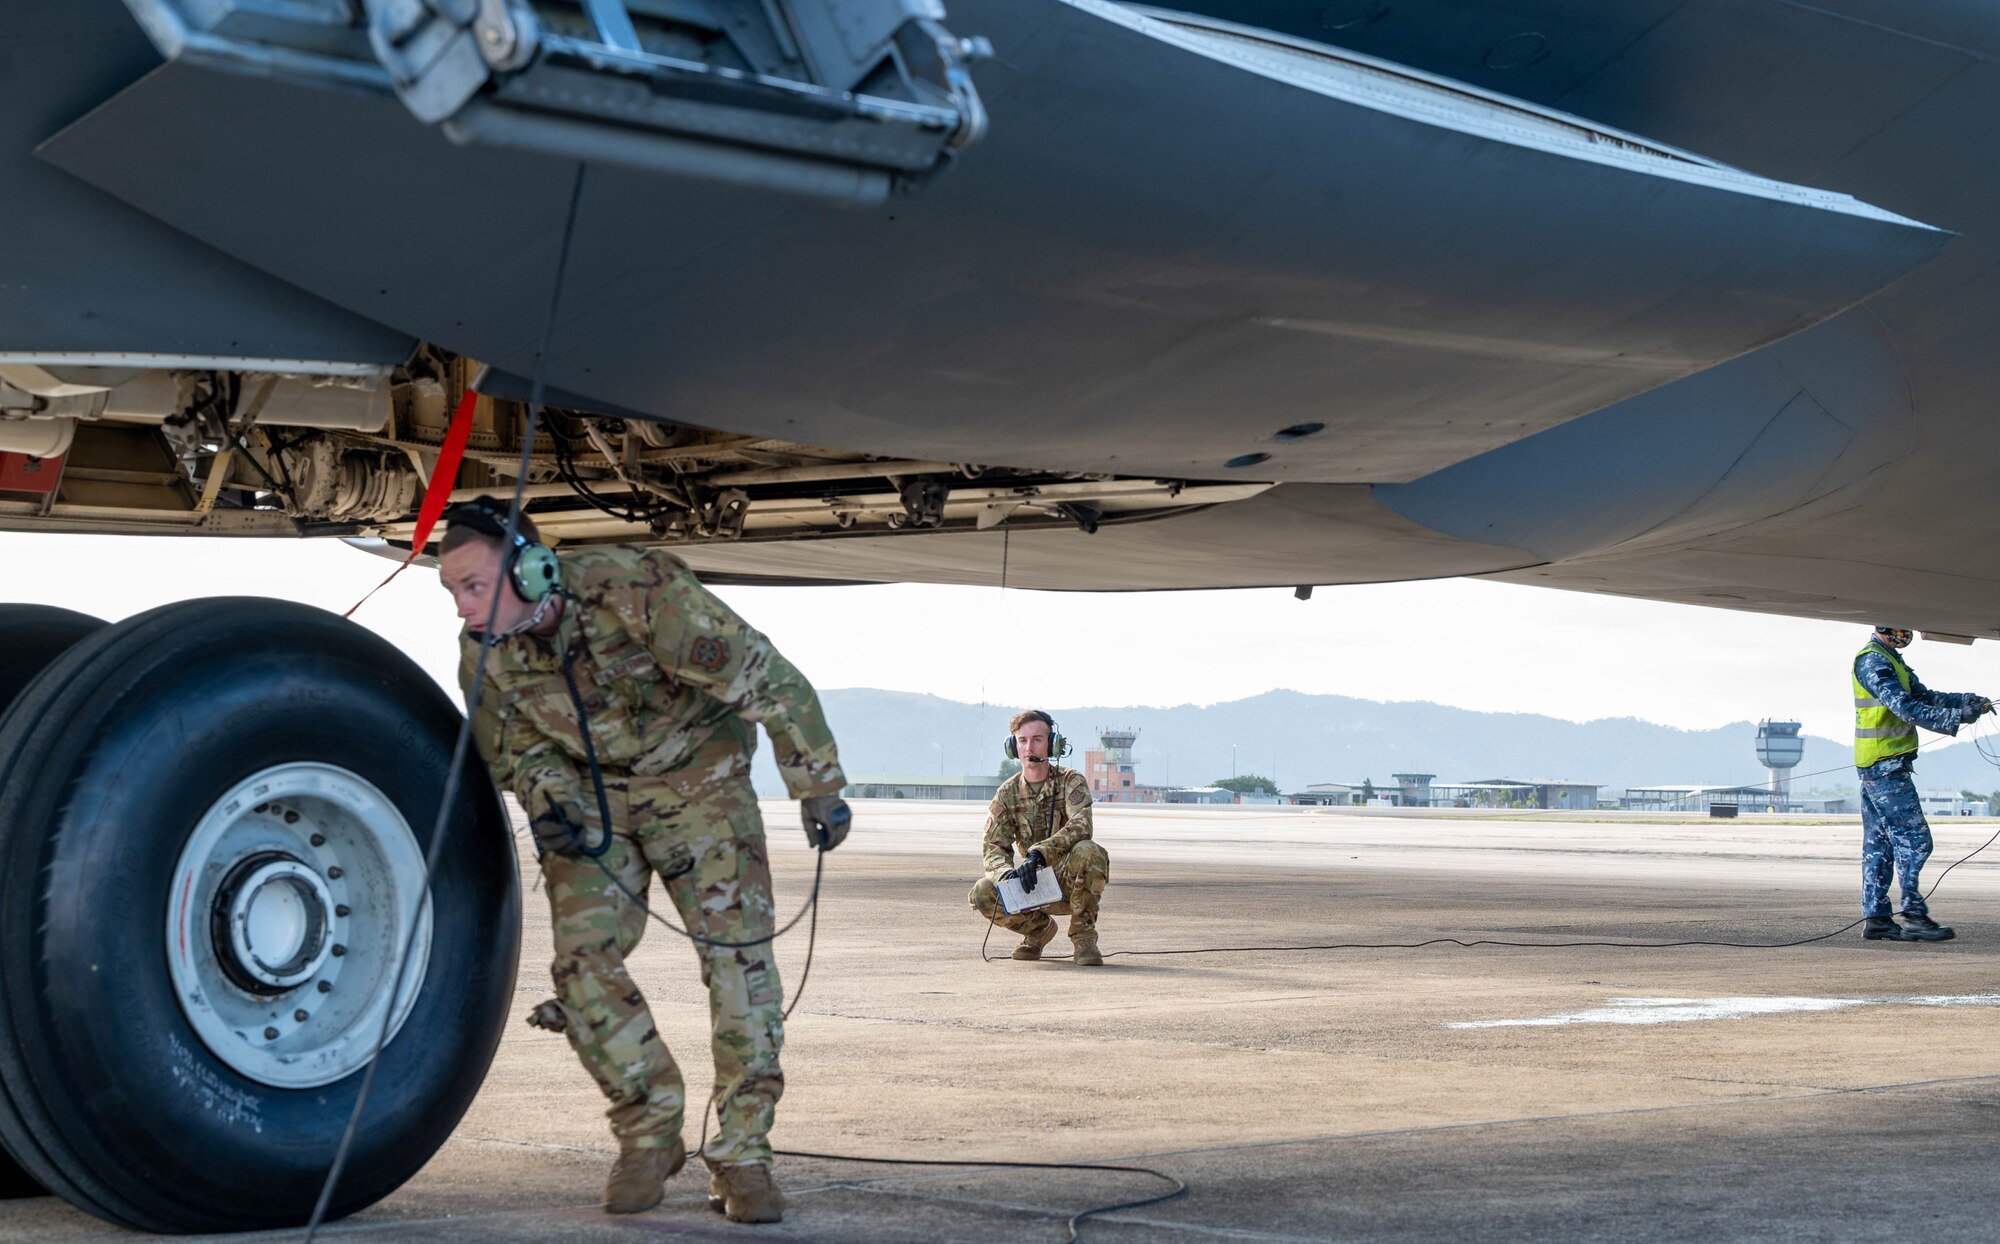 U.S. Air Force Staff Sgt. Larry White, left, 9th Airlift Squadron flight engineer, performs a tire check on a Dover Air Force Base C-5M Super Galaxy at Royal Australian Air Force Base Townsville, Australia, July 7, 2021. The C-5 transported two CH-47F Chinook helicopters to RAAF Base Townsville as a part of the Department of Defense’s Foreign Military Sales program. The U.S. and Australia maintain a robust relationship underpinned by shared democratic values, common interests and cultural bonds. The strong alliance is an anchor for peace and stability in the Indo-Pacific region and around the world. (U.S. Air Force photo by Senior Airman Faith Schaefer)